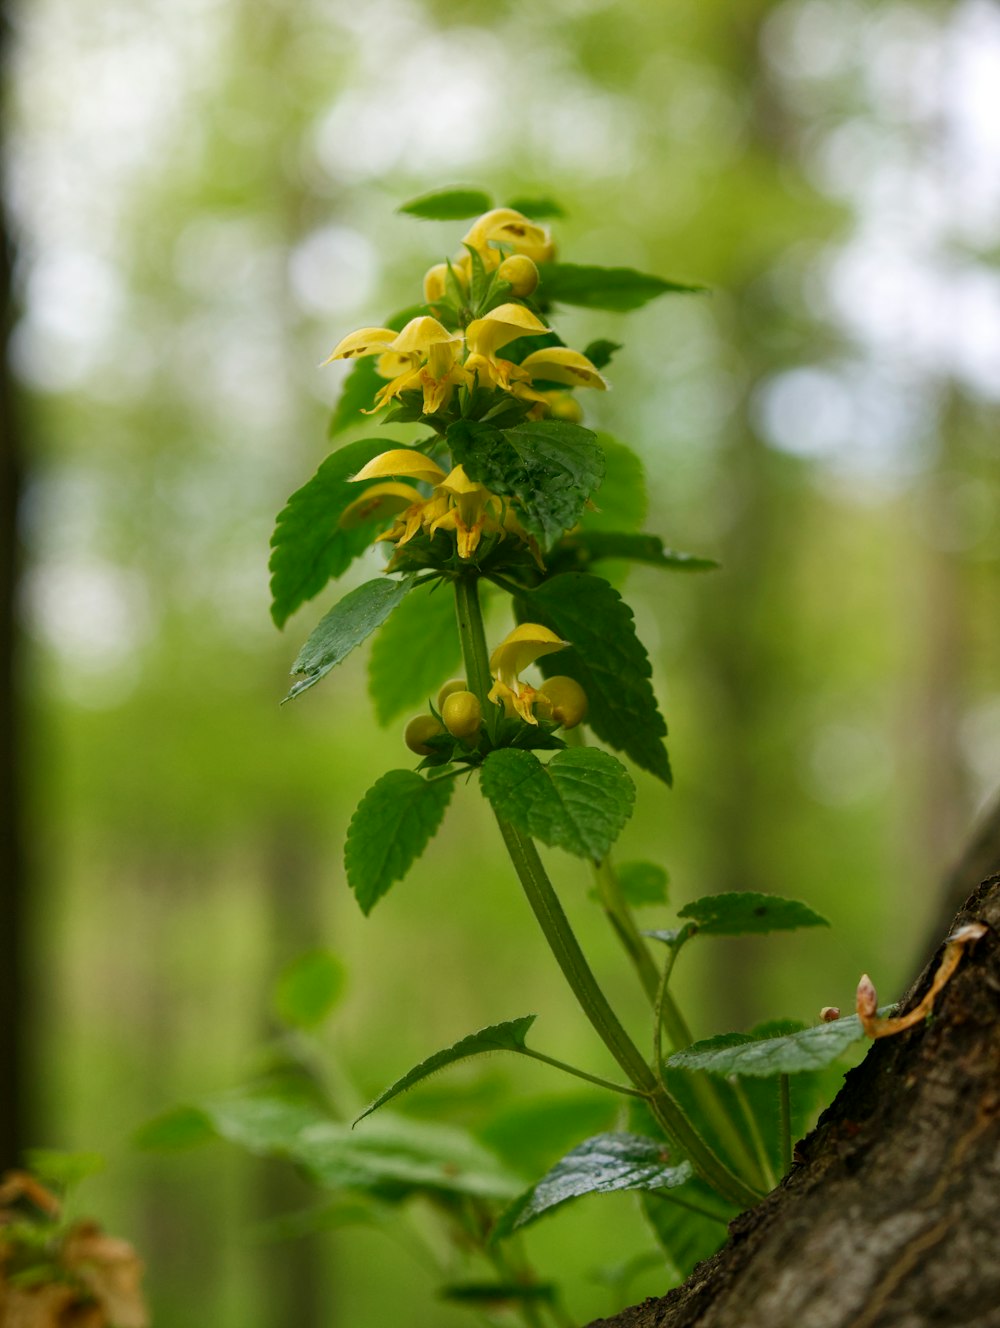 a yellow flower growing on a tree in a forest